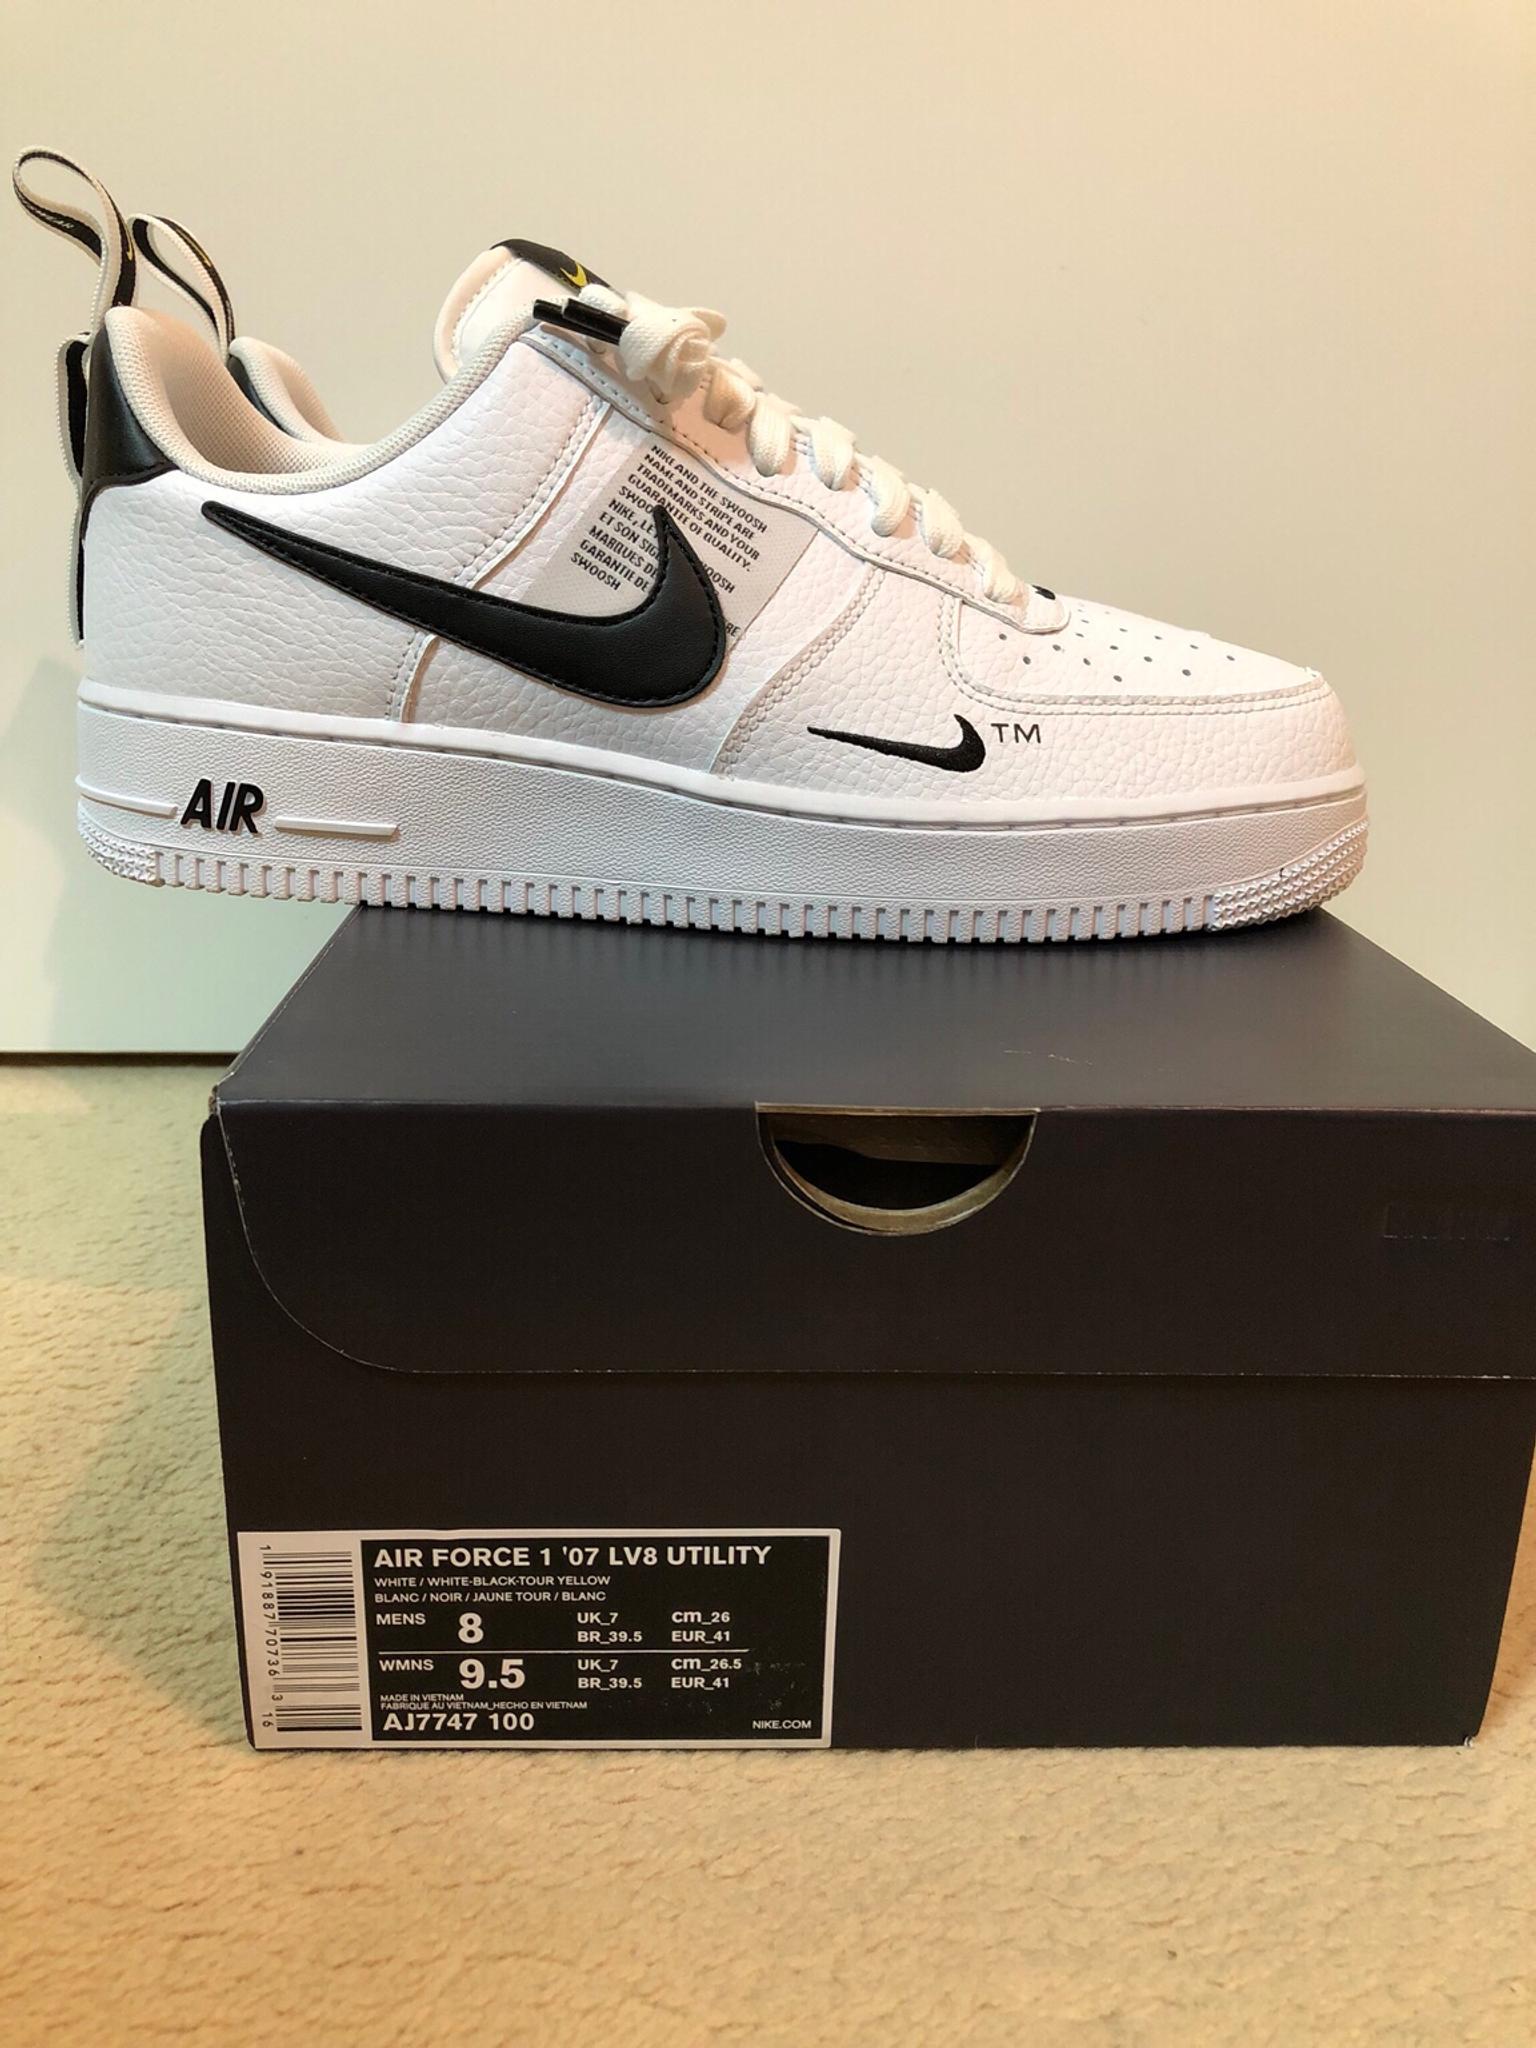 Nike Air Force 1 07 LV8 Utility Größe 41 in 82131 Gauting for €130.00 for  sale | Shpock